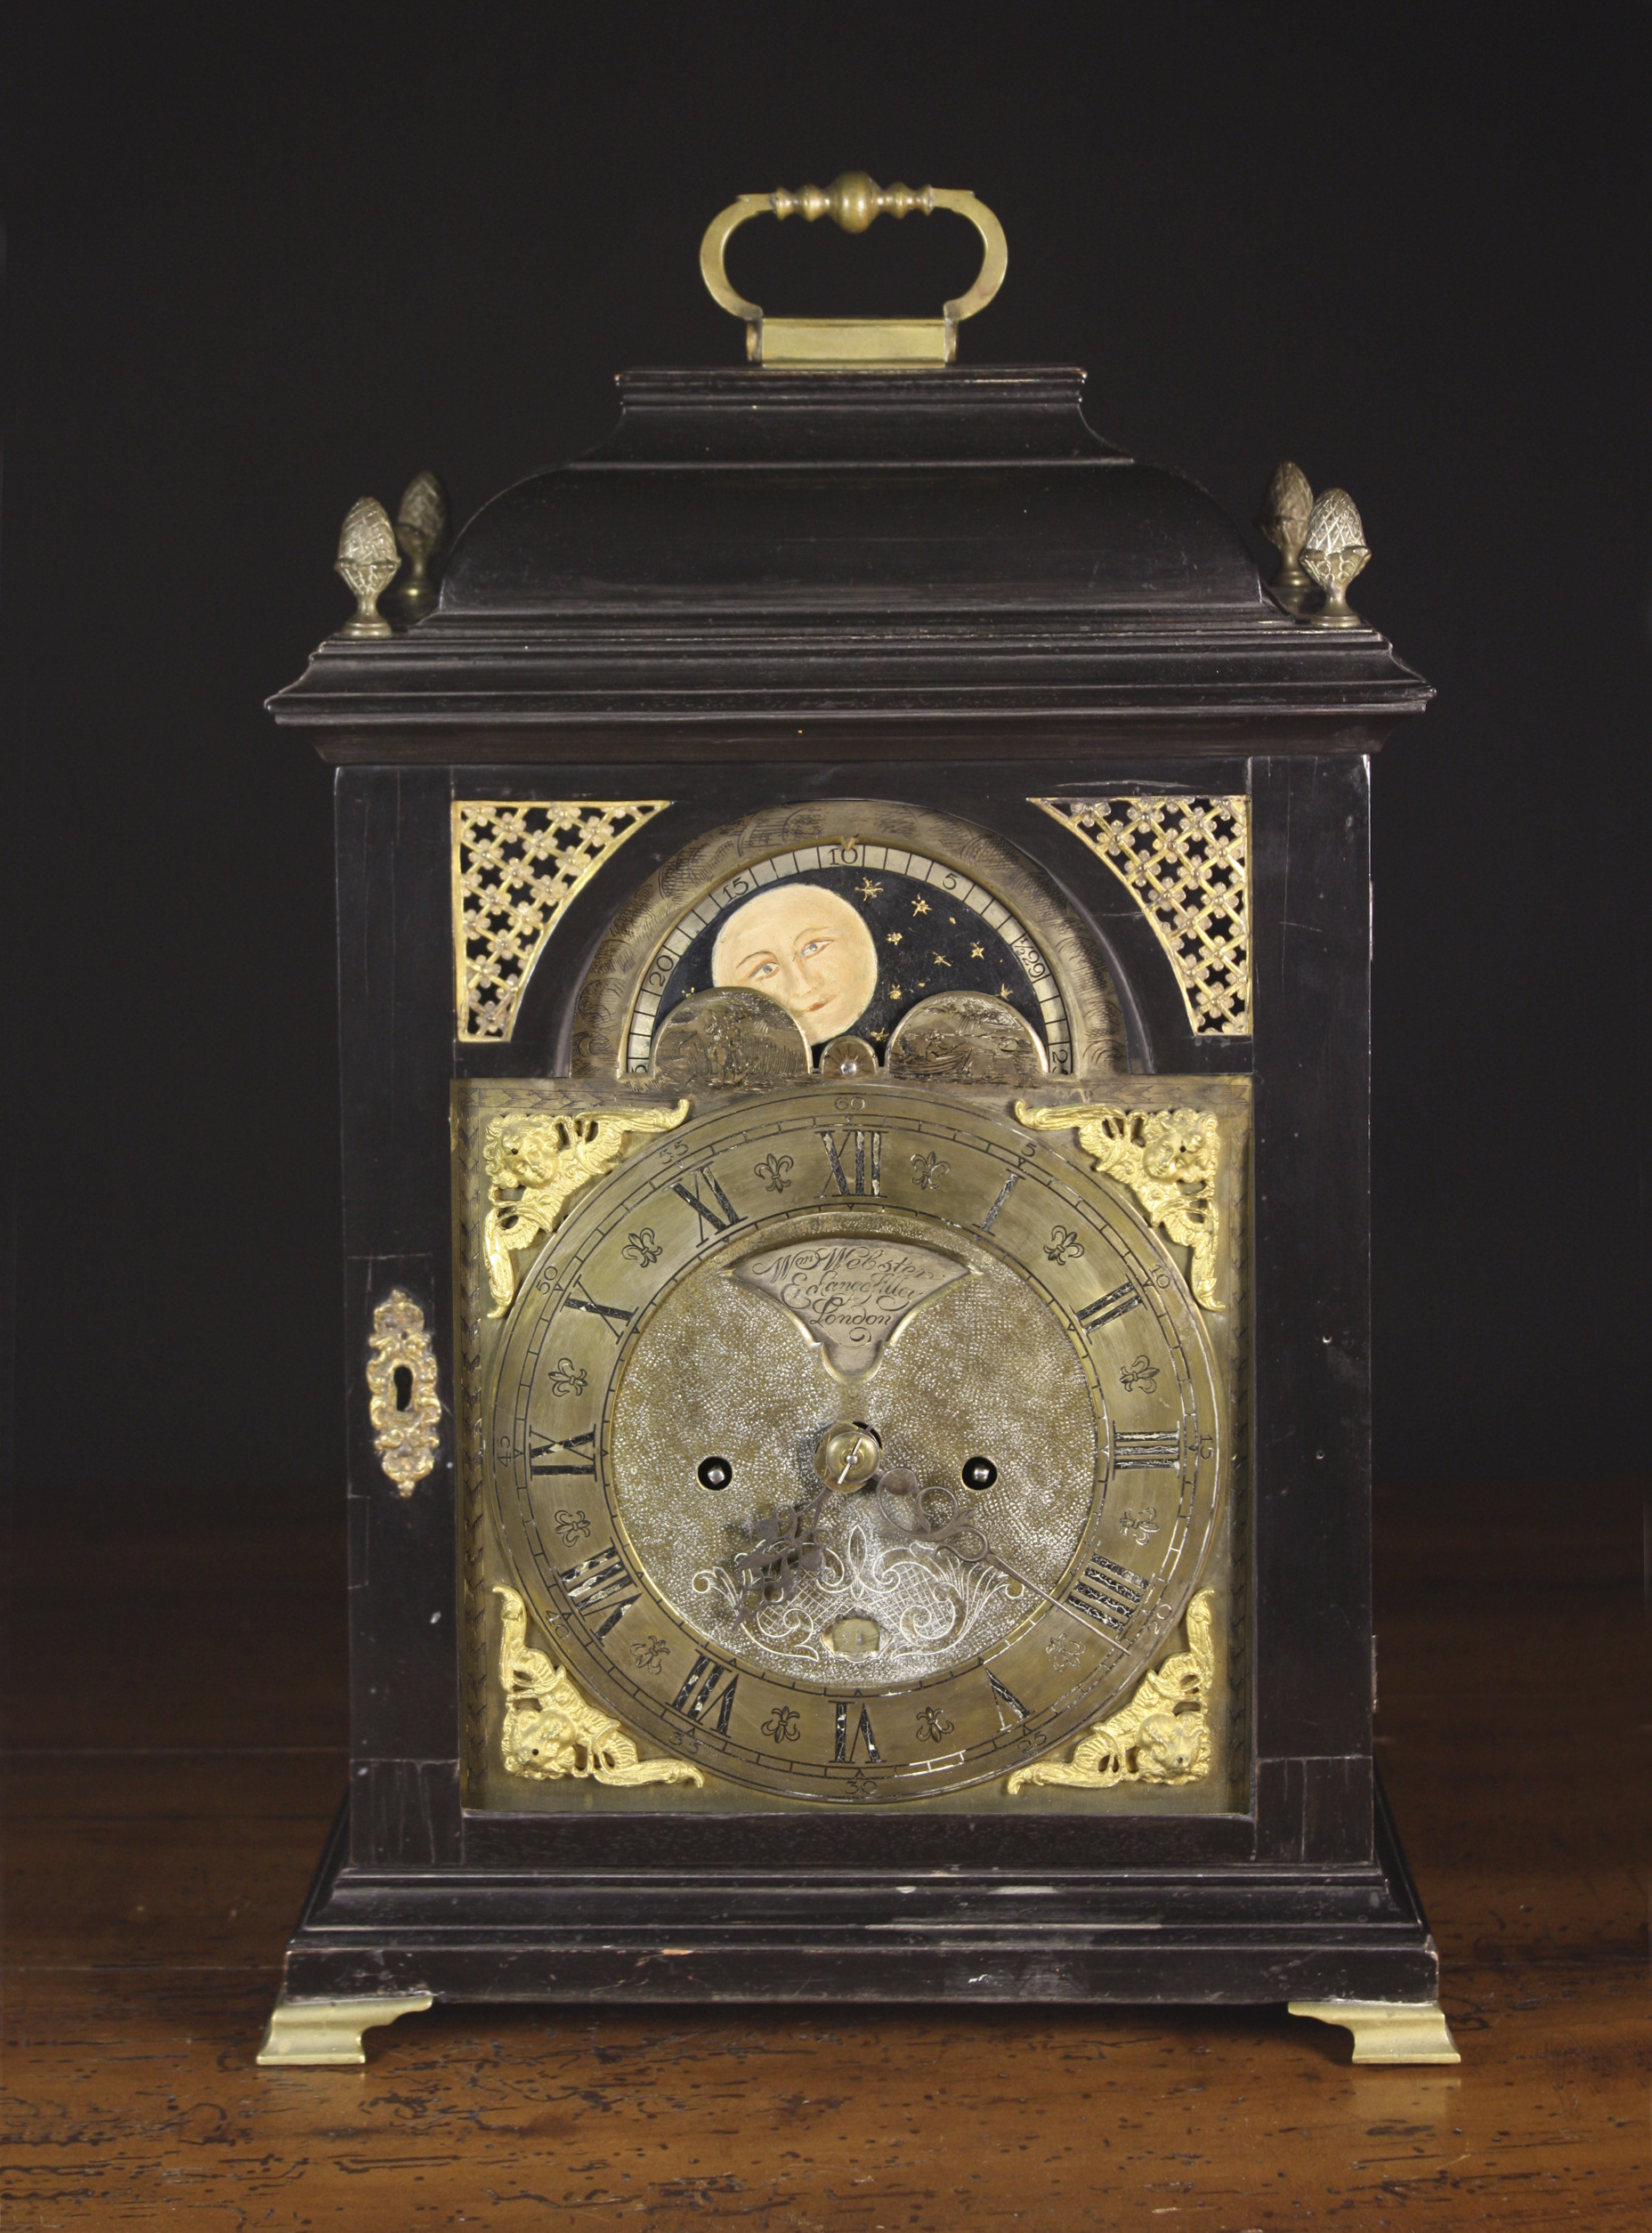 An 18th Century 8 Day Ebonised Bracket Clock by W Webster, Exchange Alley, London. The 8 inch (20